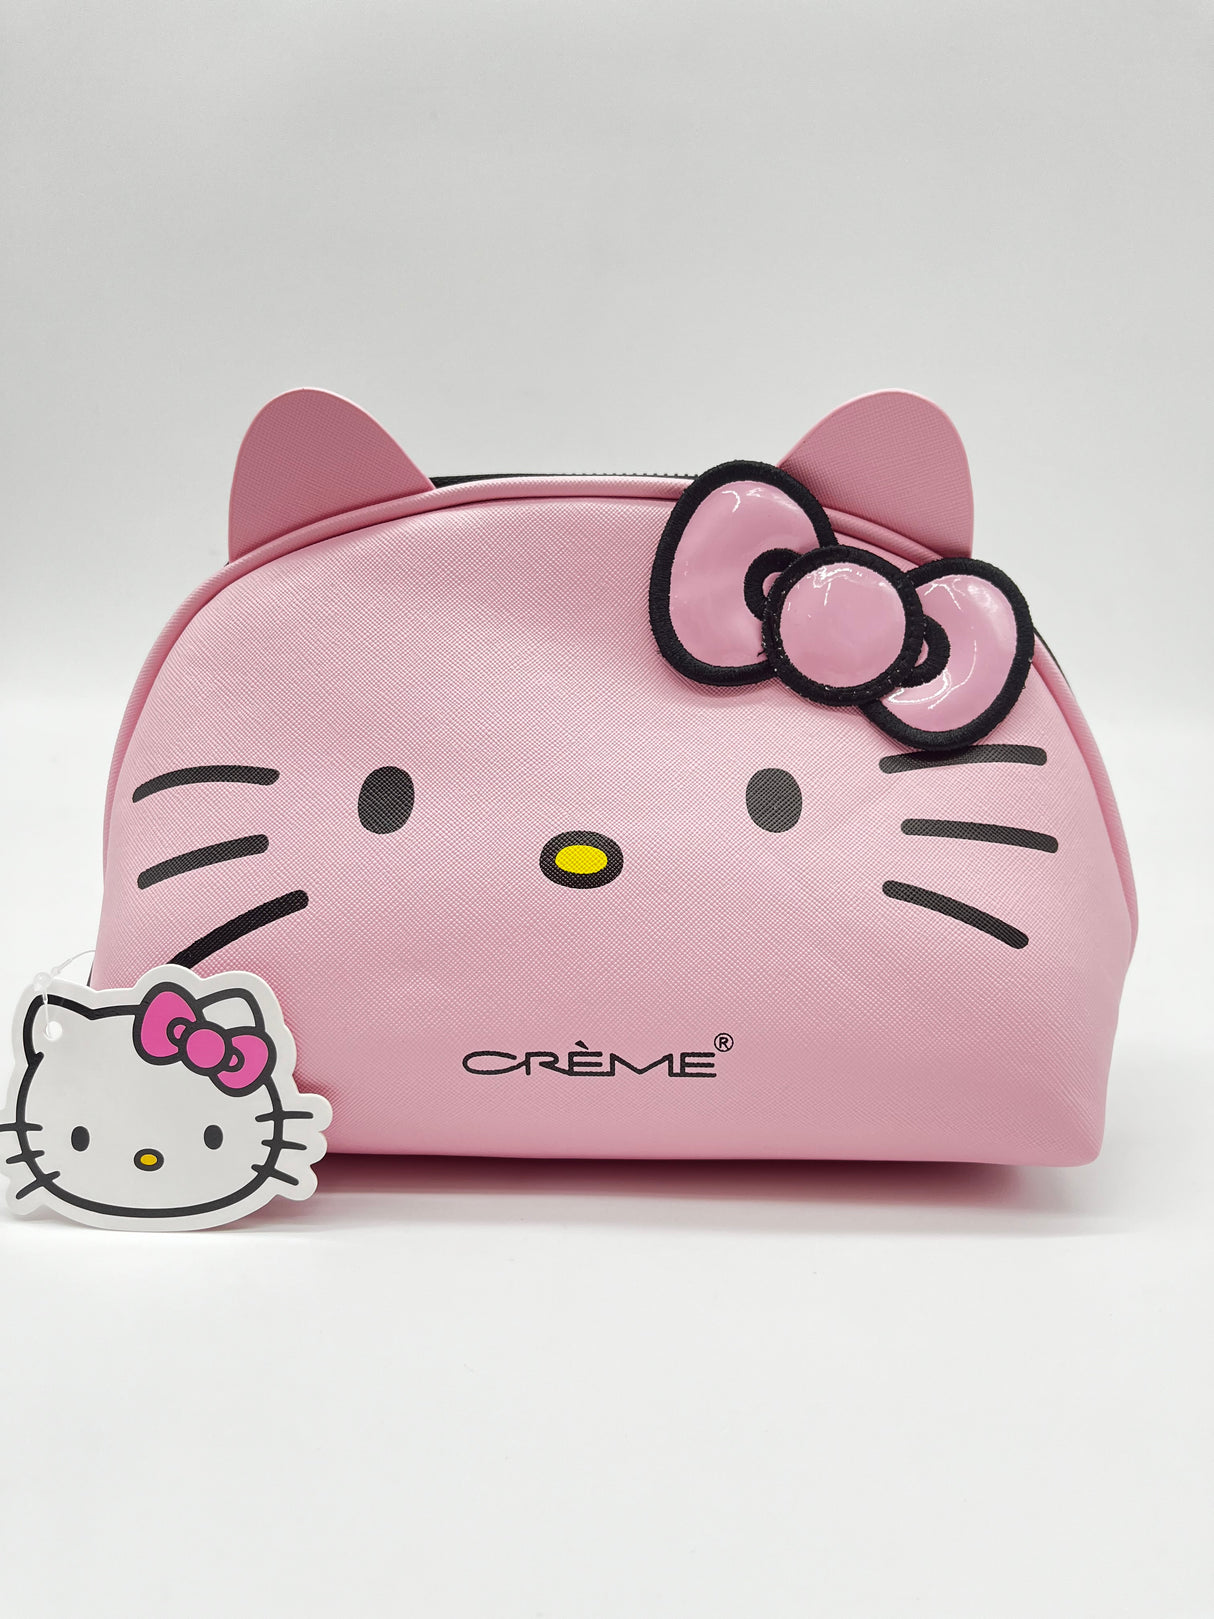 THE CREME SHOP-HELLO KITTY- THINK PINK MAKEUP POUCH- 1PC